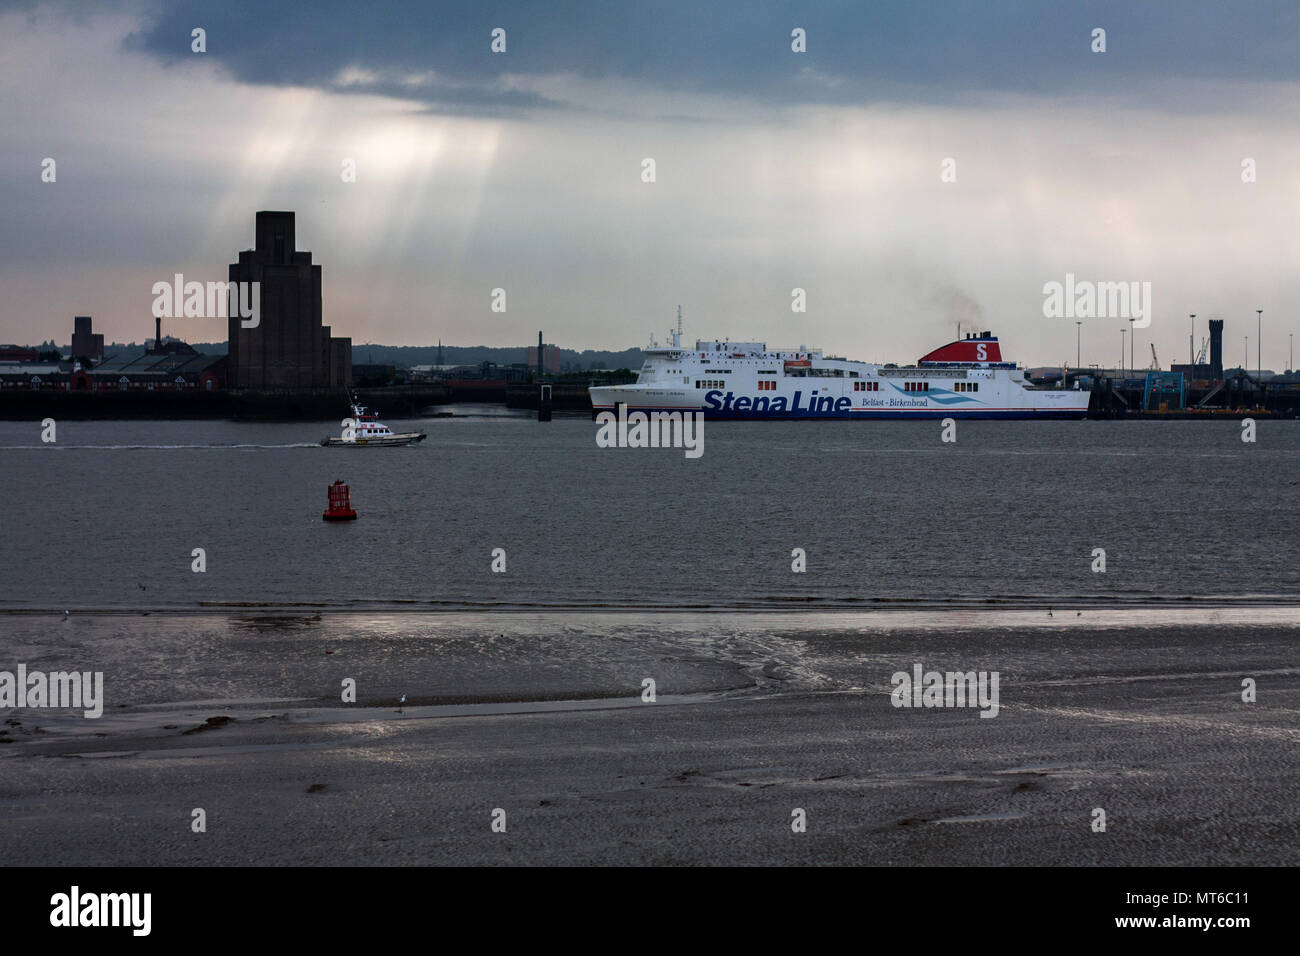 Sand shore of River Mersey in Liverpool, with a ship docked in Belfast, UK. Stock Photo